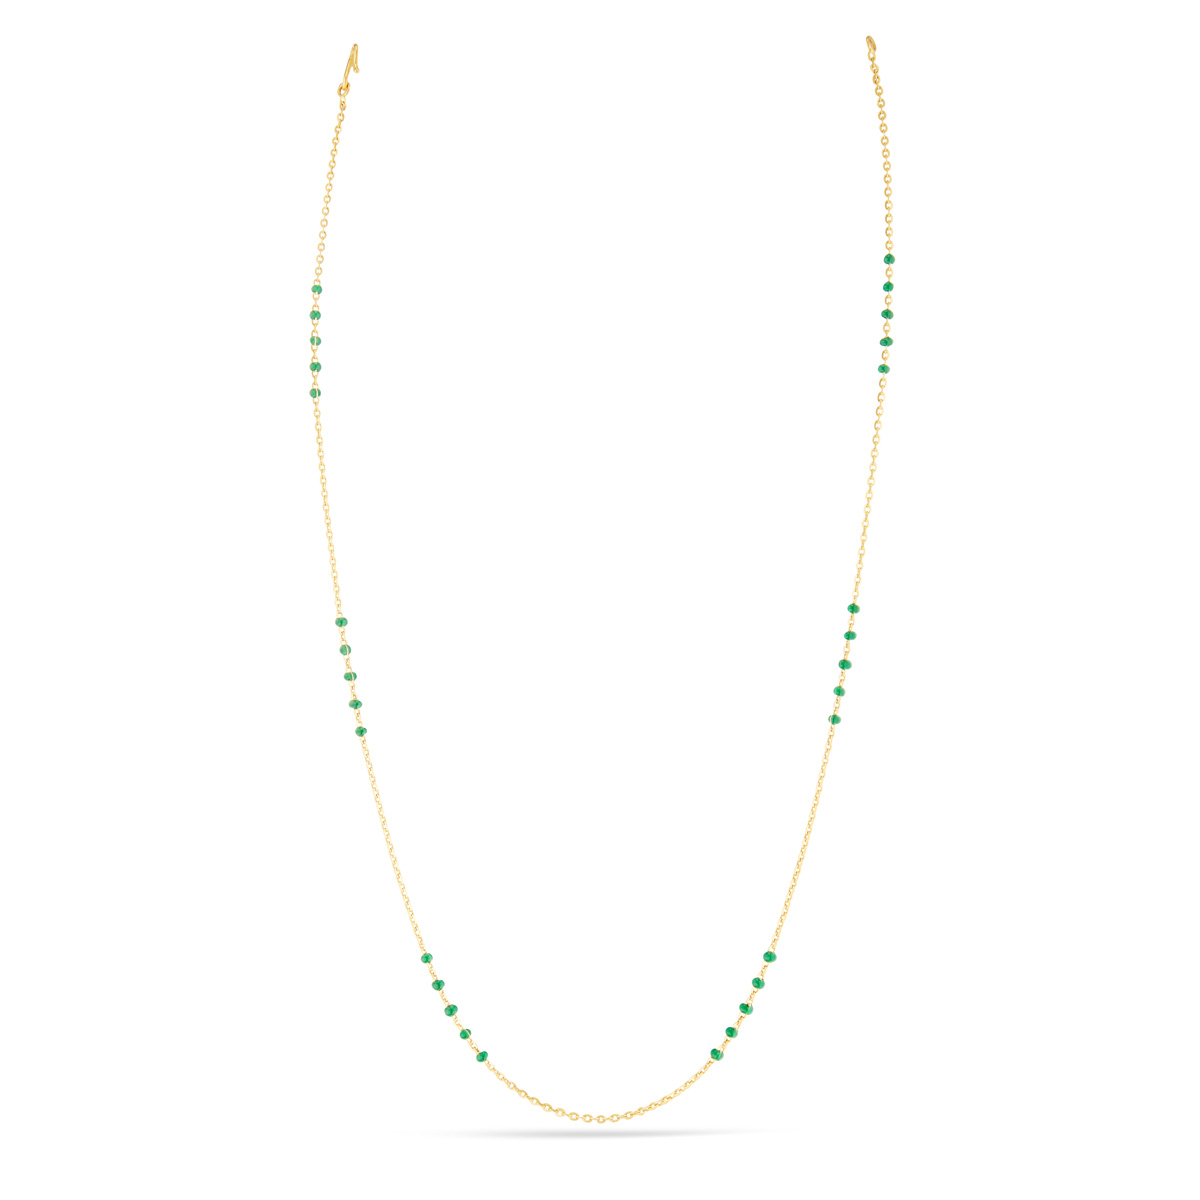 Gold Chain With Green Beads